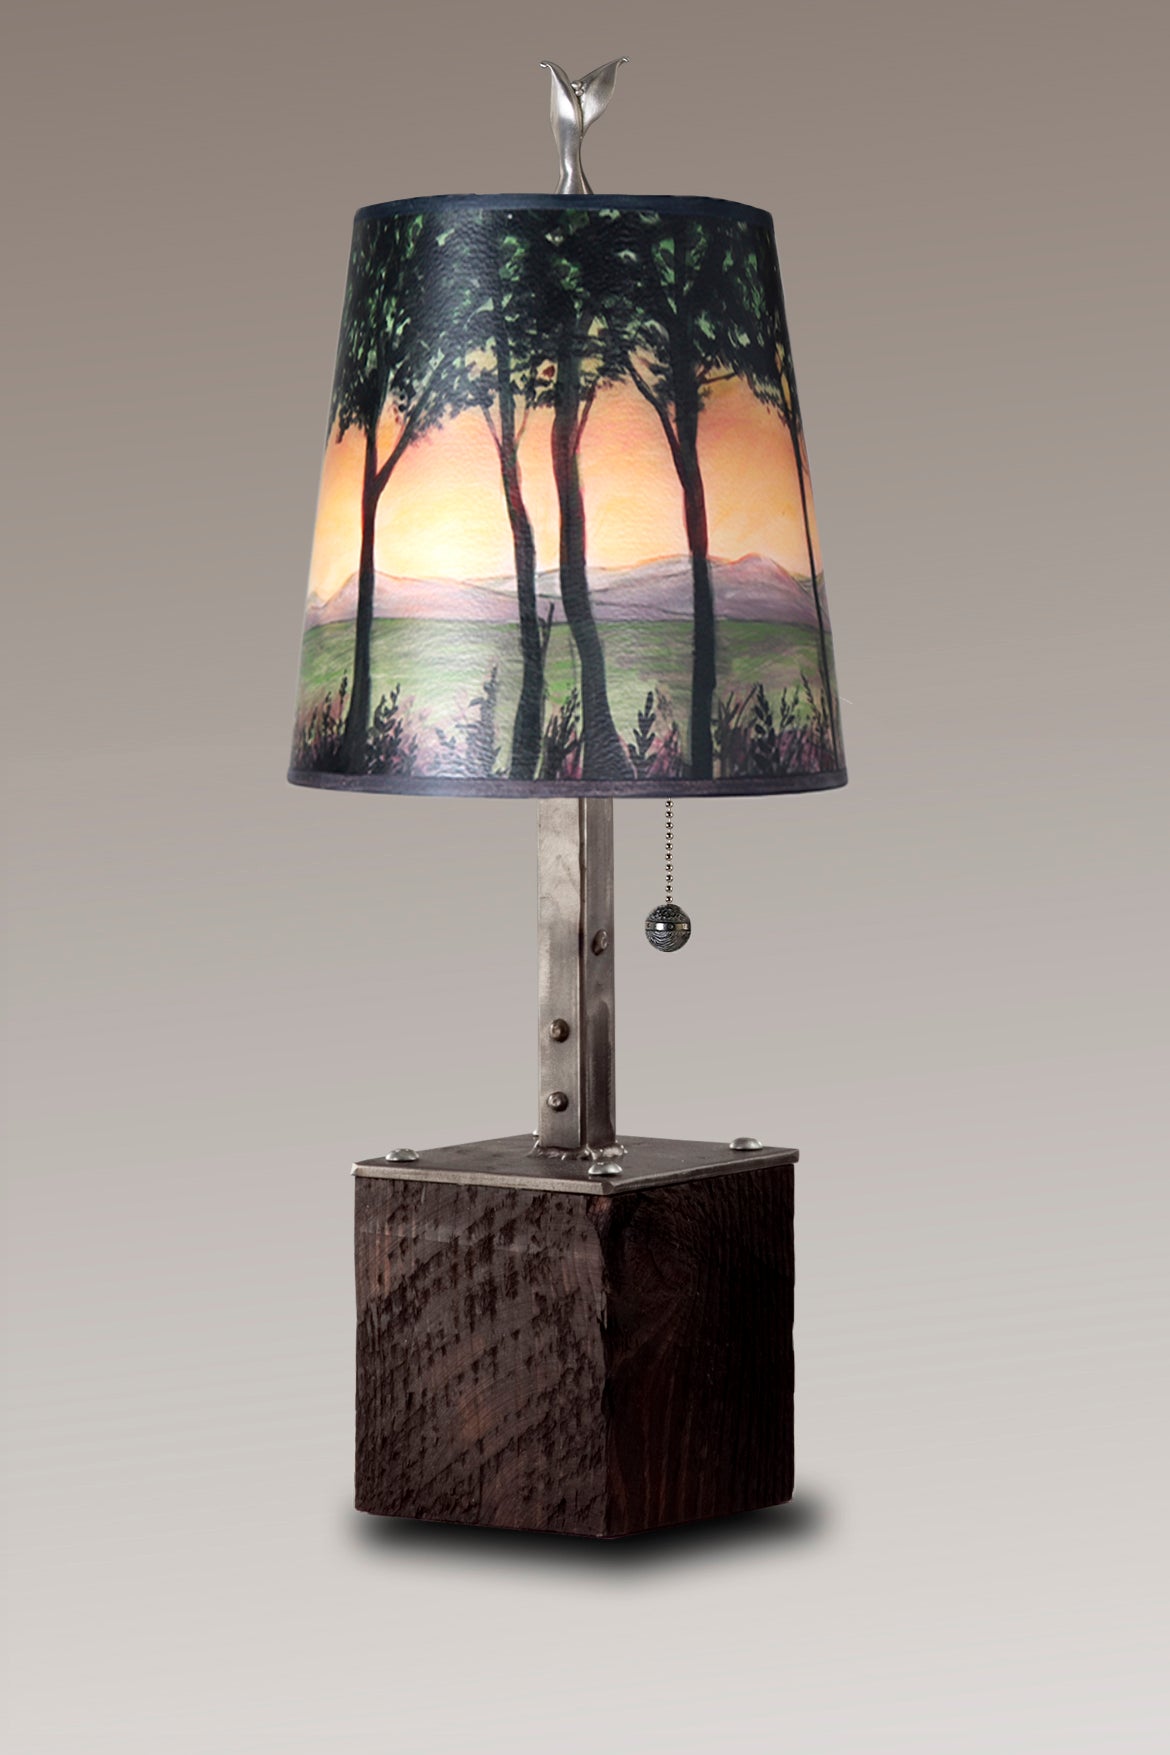 Janna Ugone & Co Table Lamps Steel Table Lamp on Reclaimed Wood with Small Drum Shade in Dawn